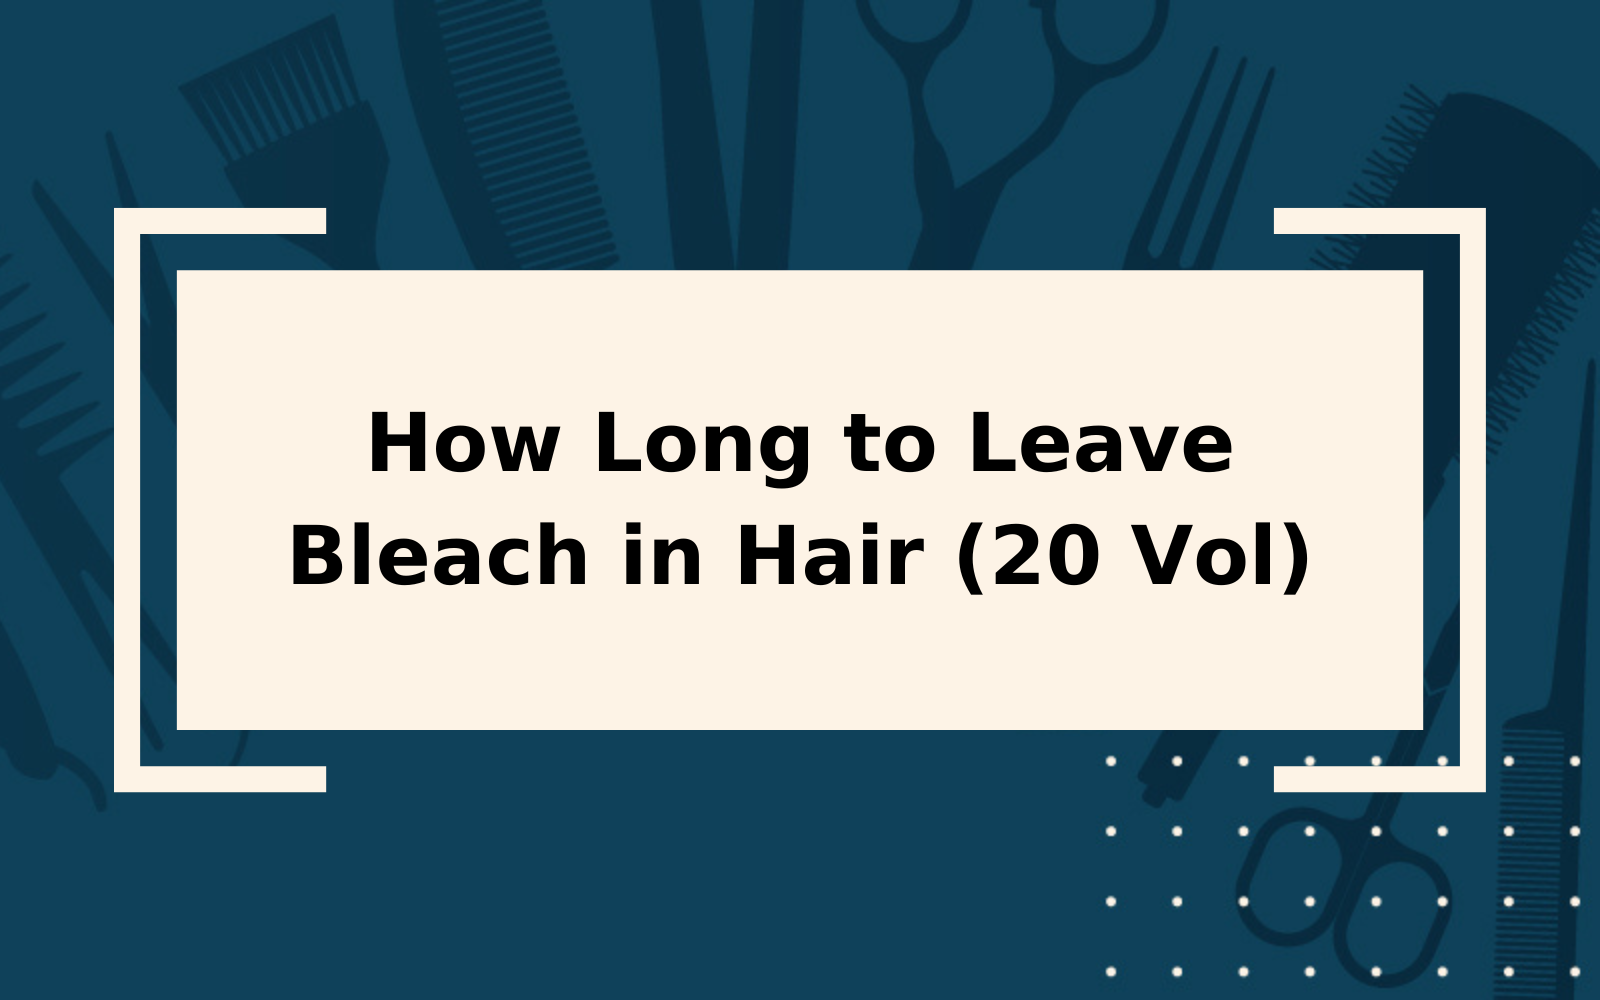 How Long to Leave Bleach in Hair (20 Vol) | Expert Tips